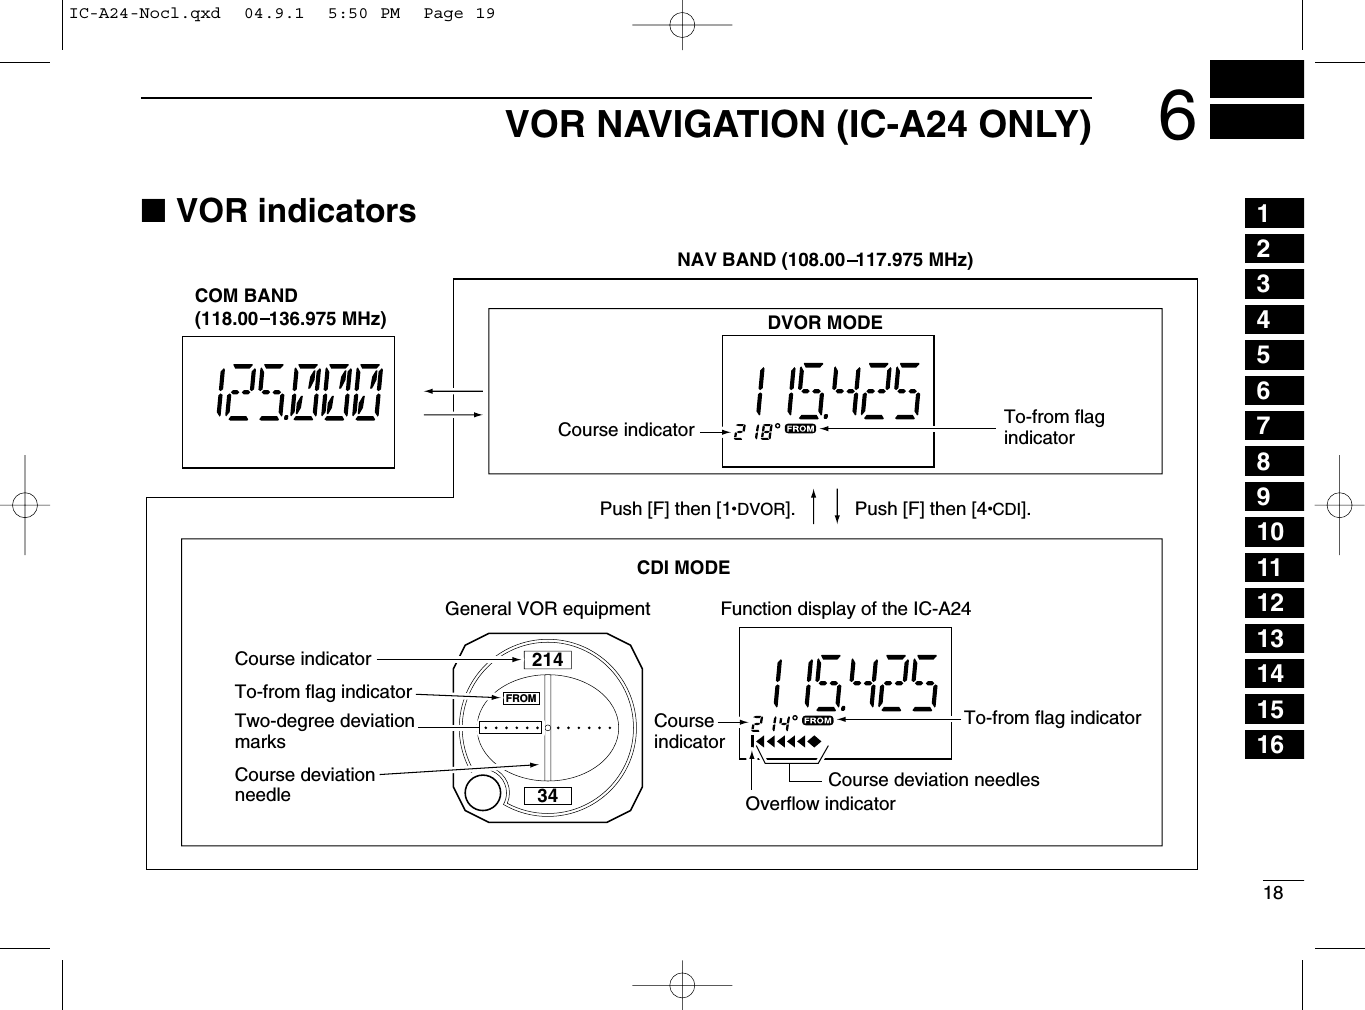 186VOR NAVIGATION (IC-A24 ONLY)■VOR indicators21434FROMCOM BAND(118.00  136.975 MHz)NAV BAND (108.00  117.975 MHz)DVOR MODEFunction display of the IC-A24General VOR equipmentTo-from flag indicatorCDI MODECourse indicatorCourseindicatorCourse deviation needlesOverflow indicatorPush [F] then [4 CDI].Push [F] then [1 DVOR].To-from flag indicatorCourse indicatorCourse deviation needleTo-from flag indicatorTwo-degree deviation marks12345678910111213141516IC-A24-Nocl.qxd  04.9.1  5:50 PM  Page 19